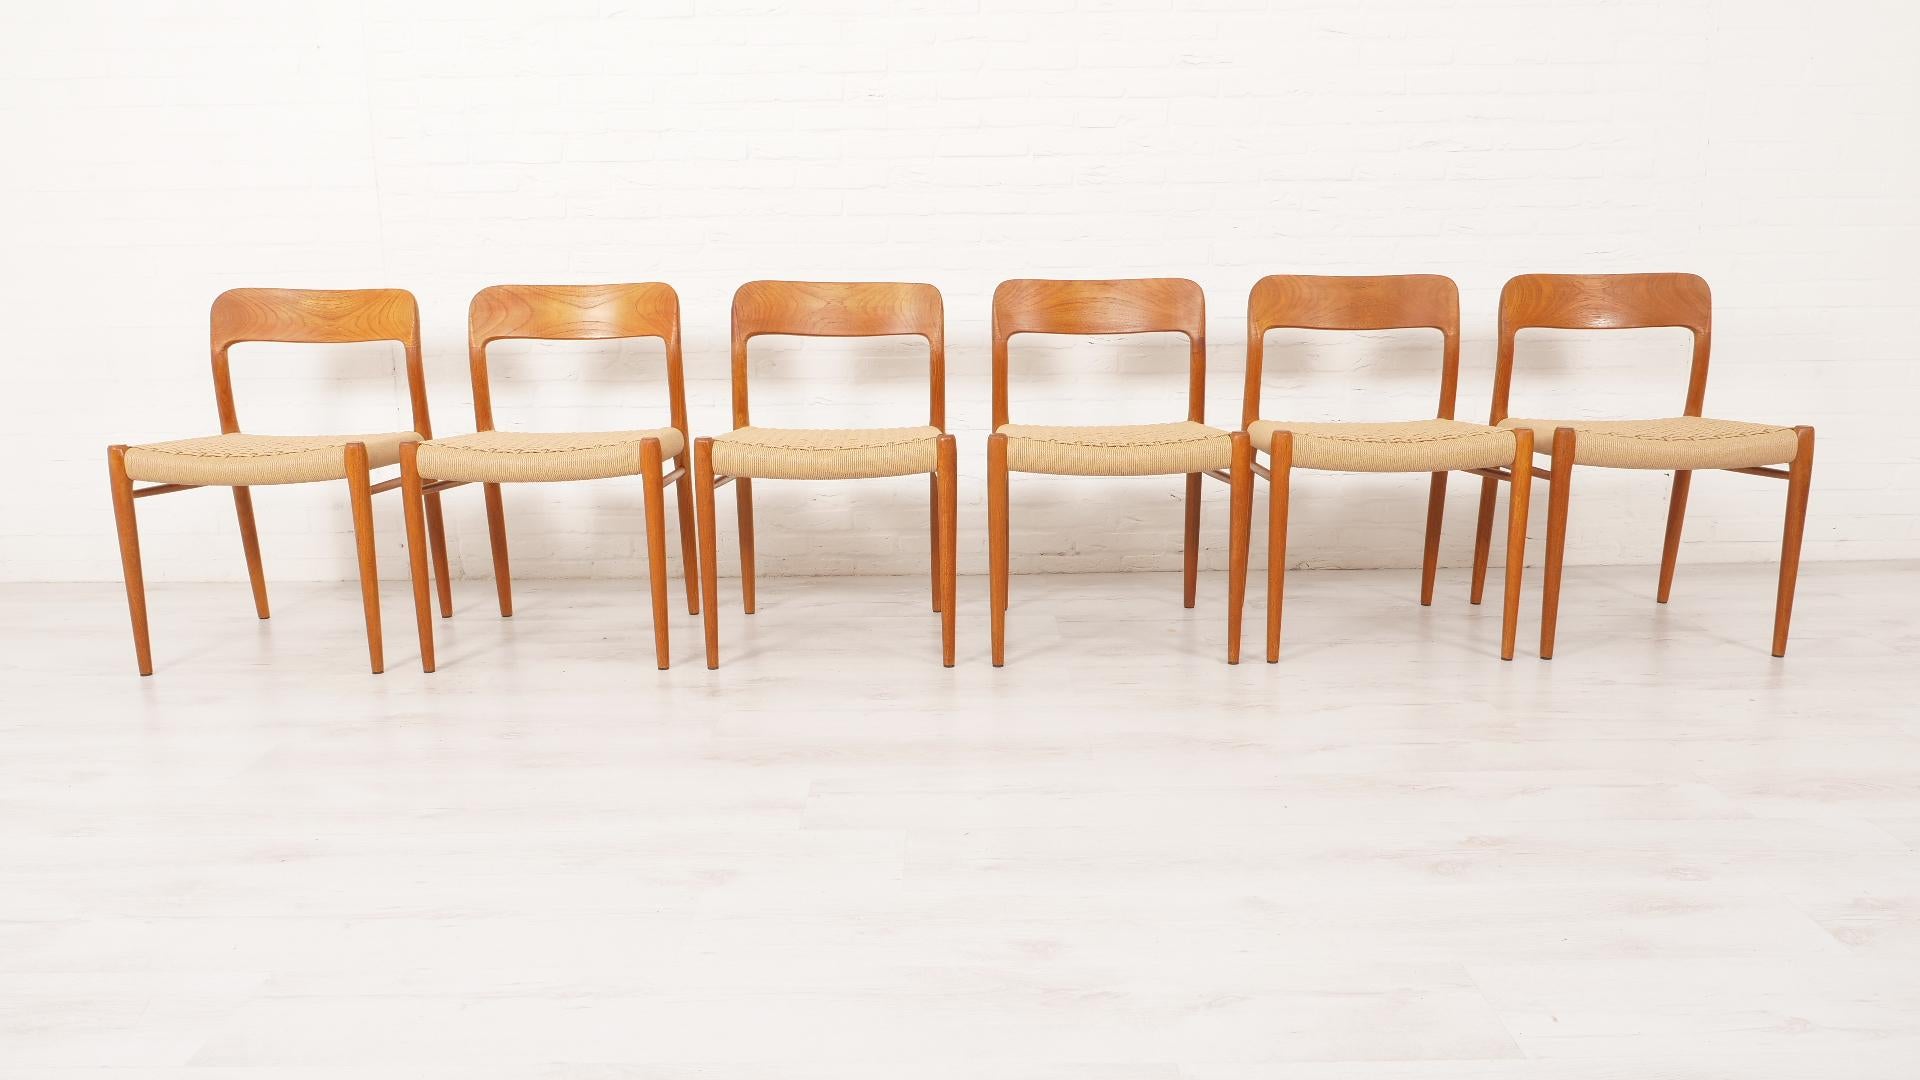 Set of 6 beautiful Danish vintage dining chairs. These chairs were designed by Niels Otto Møller. The chairs are finished in Teak and fitted with new papercord.

Design period: 1950 - 1960
Style: Mid-century modern - Danish design - Scandinavian